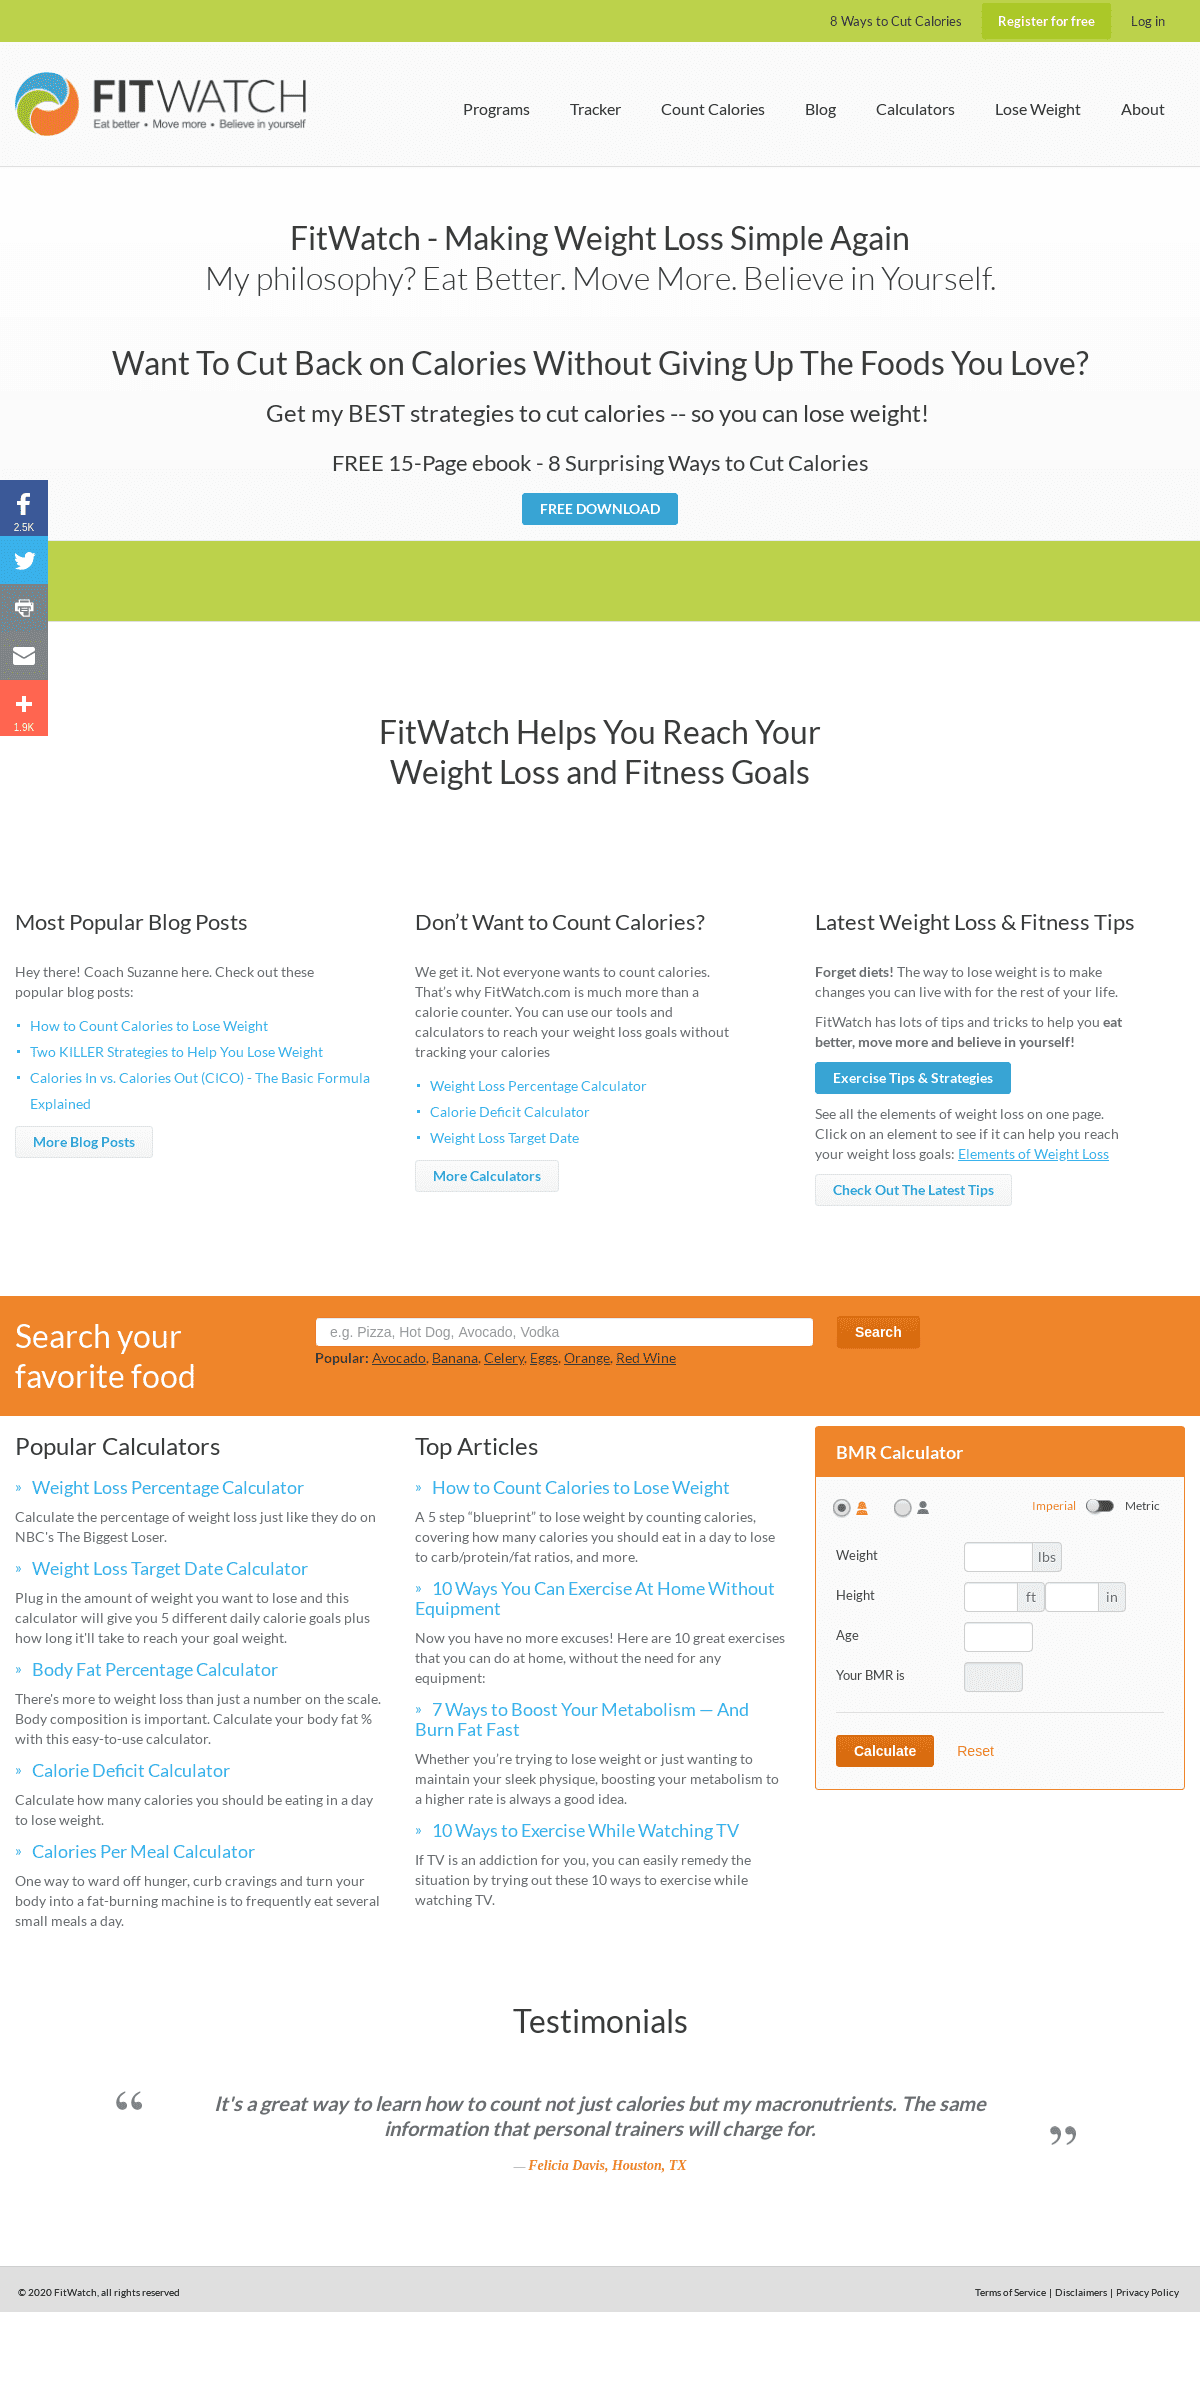 A complete backup of fitwatch.com